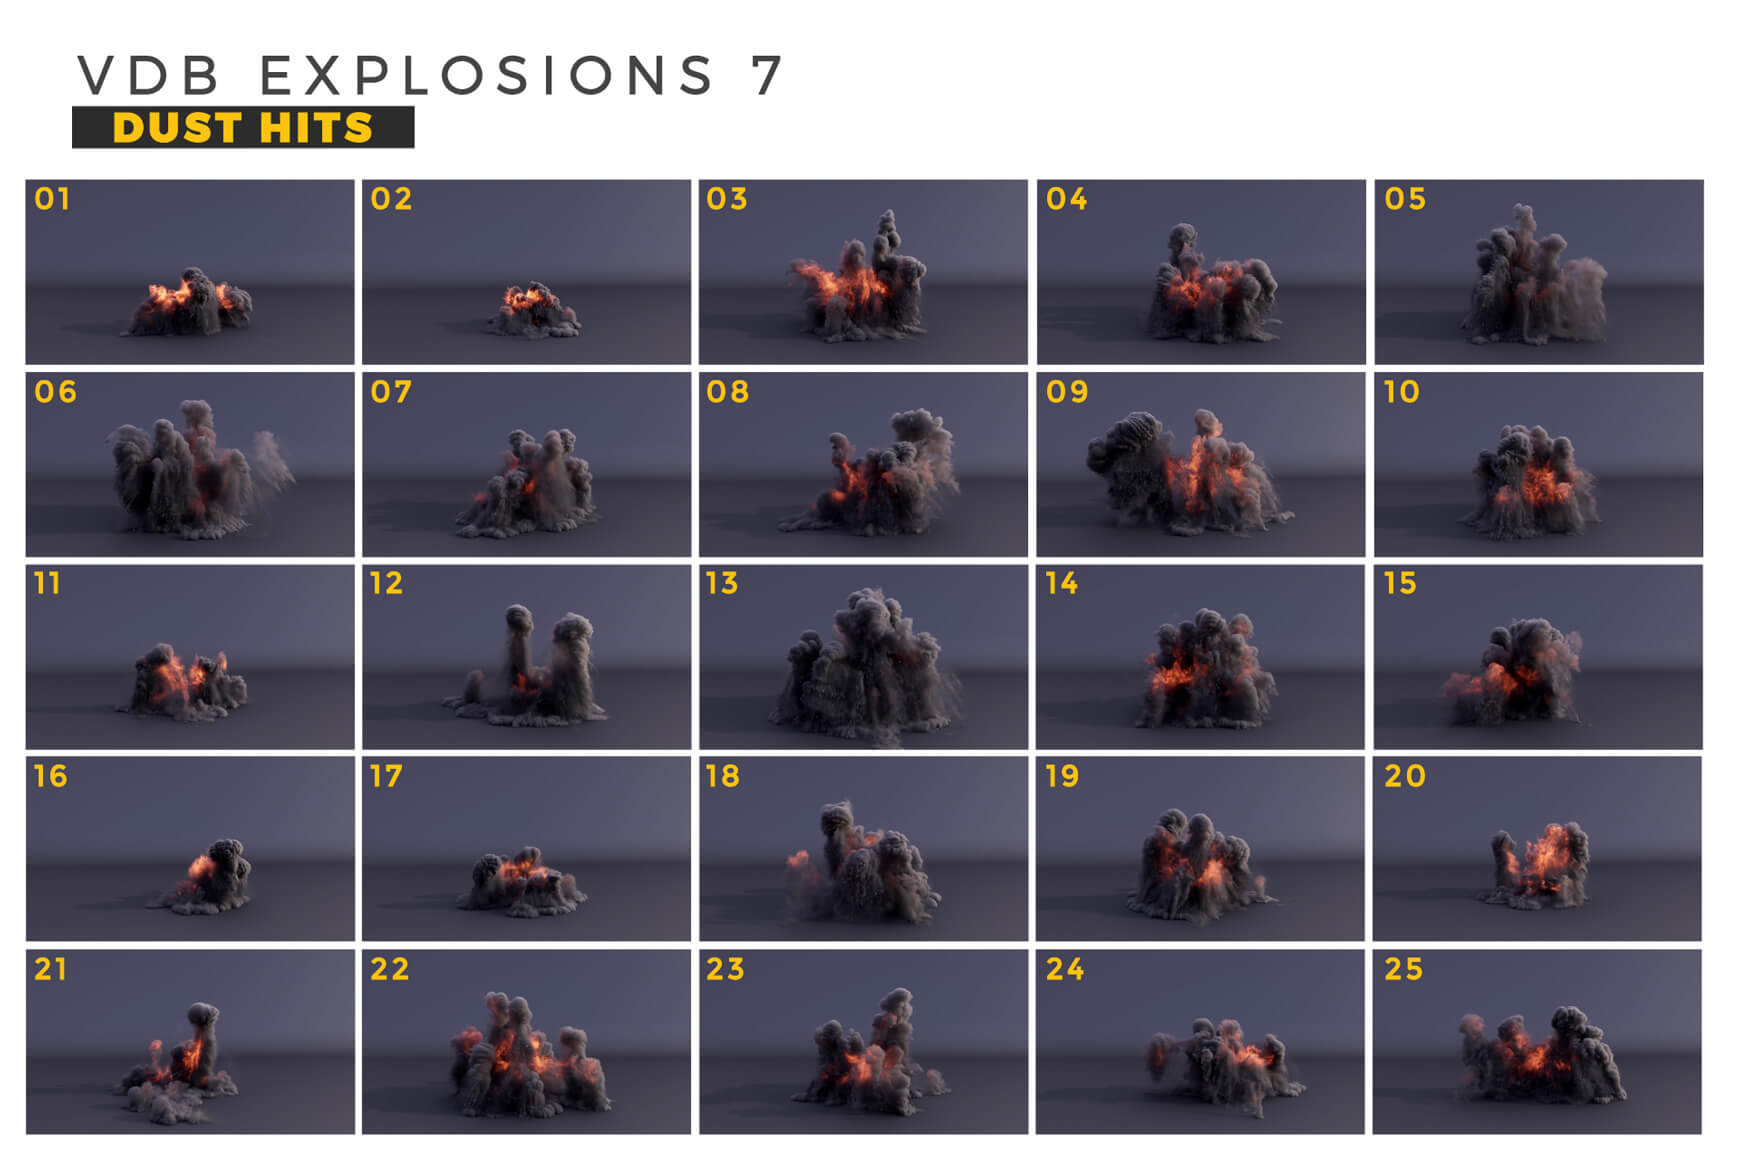 DVD Volume Explosions 7 Dust Hits